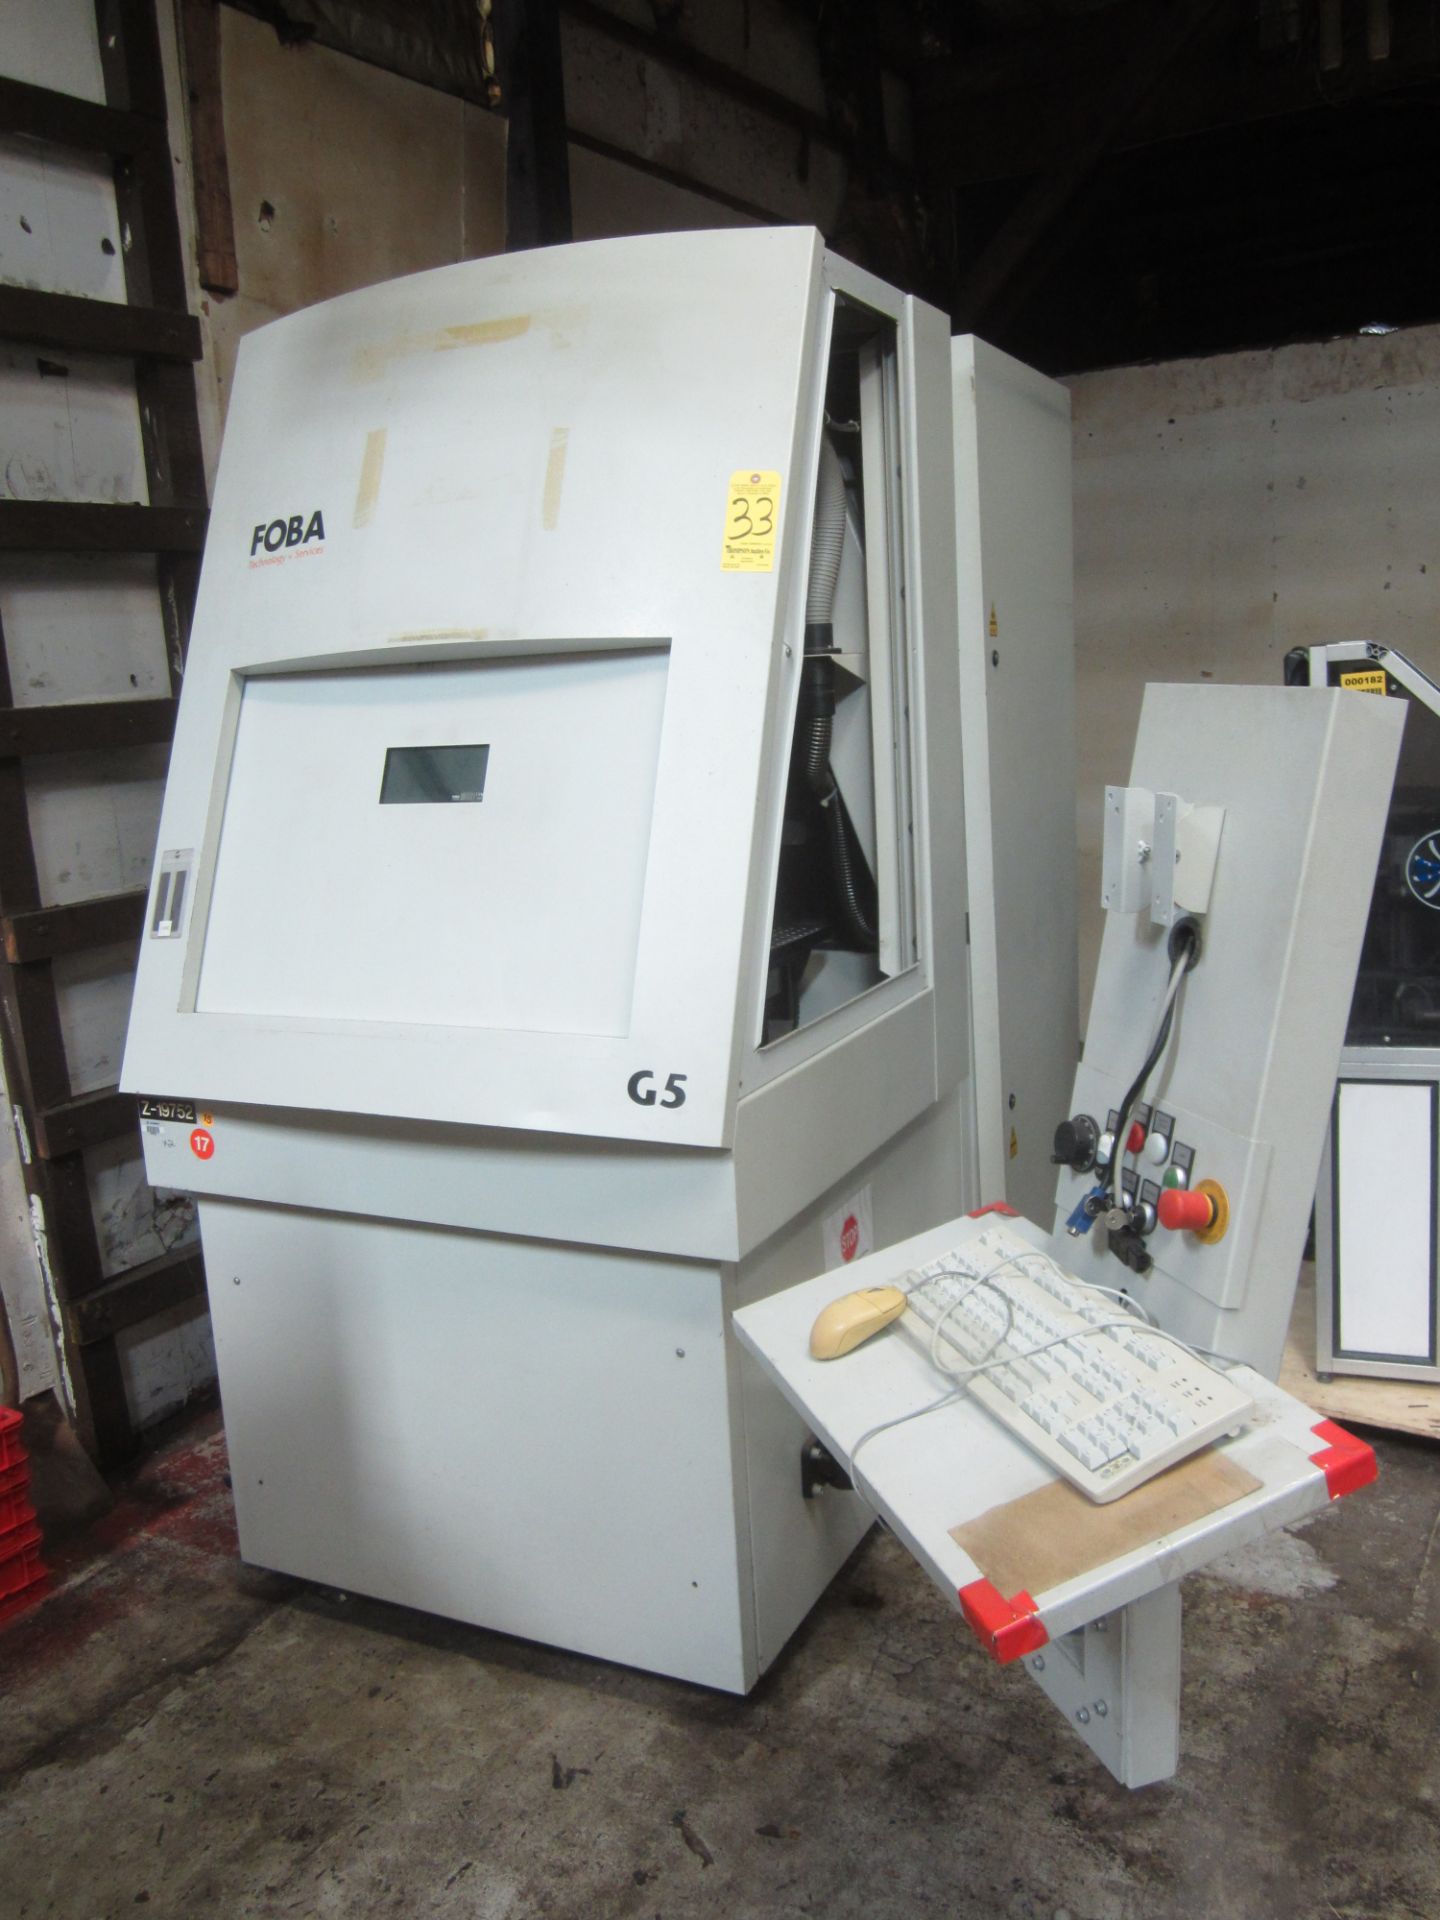 Foba Model G5 CNC Laser Parts Marker, s/n 106520/10000, New 2007, 4th Axis Indexer, 4.72" X 4.72" - Image 3 of 13